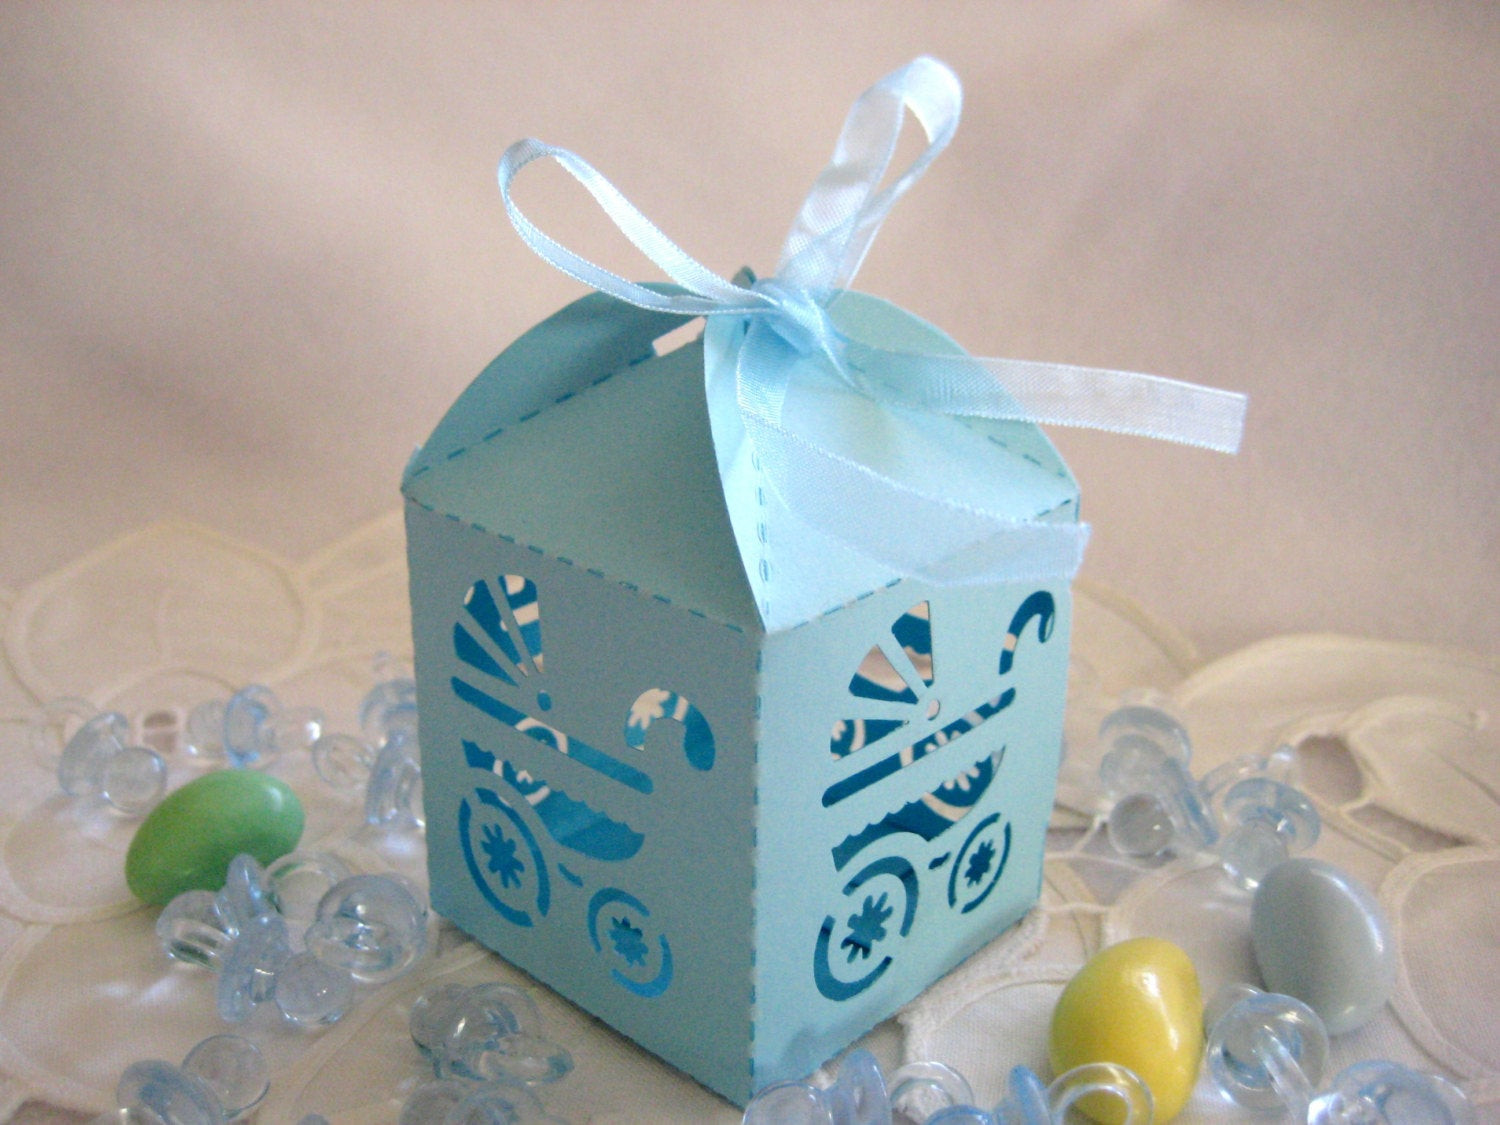 Baby Boy Shower Party Favors
 Blue Baby Boy Carriage Party Favor Boxes for Baby Boy Baby